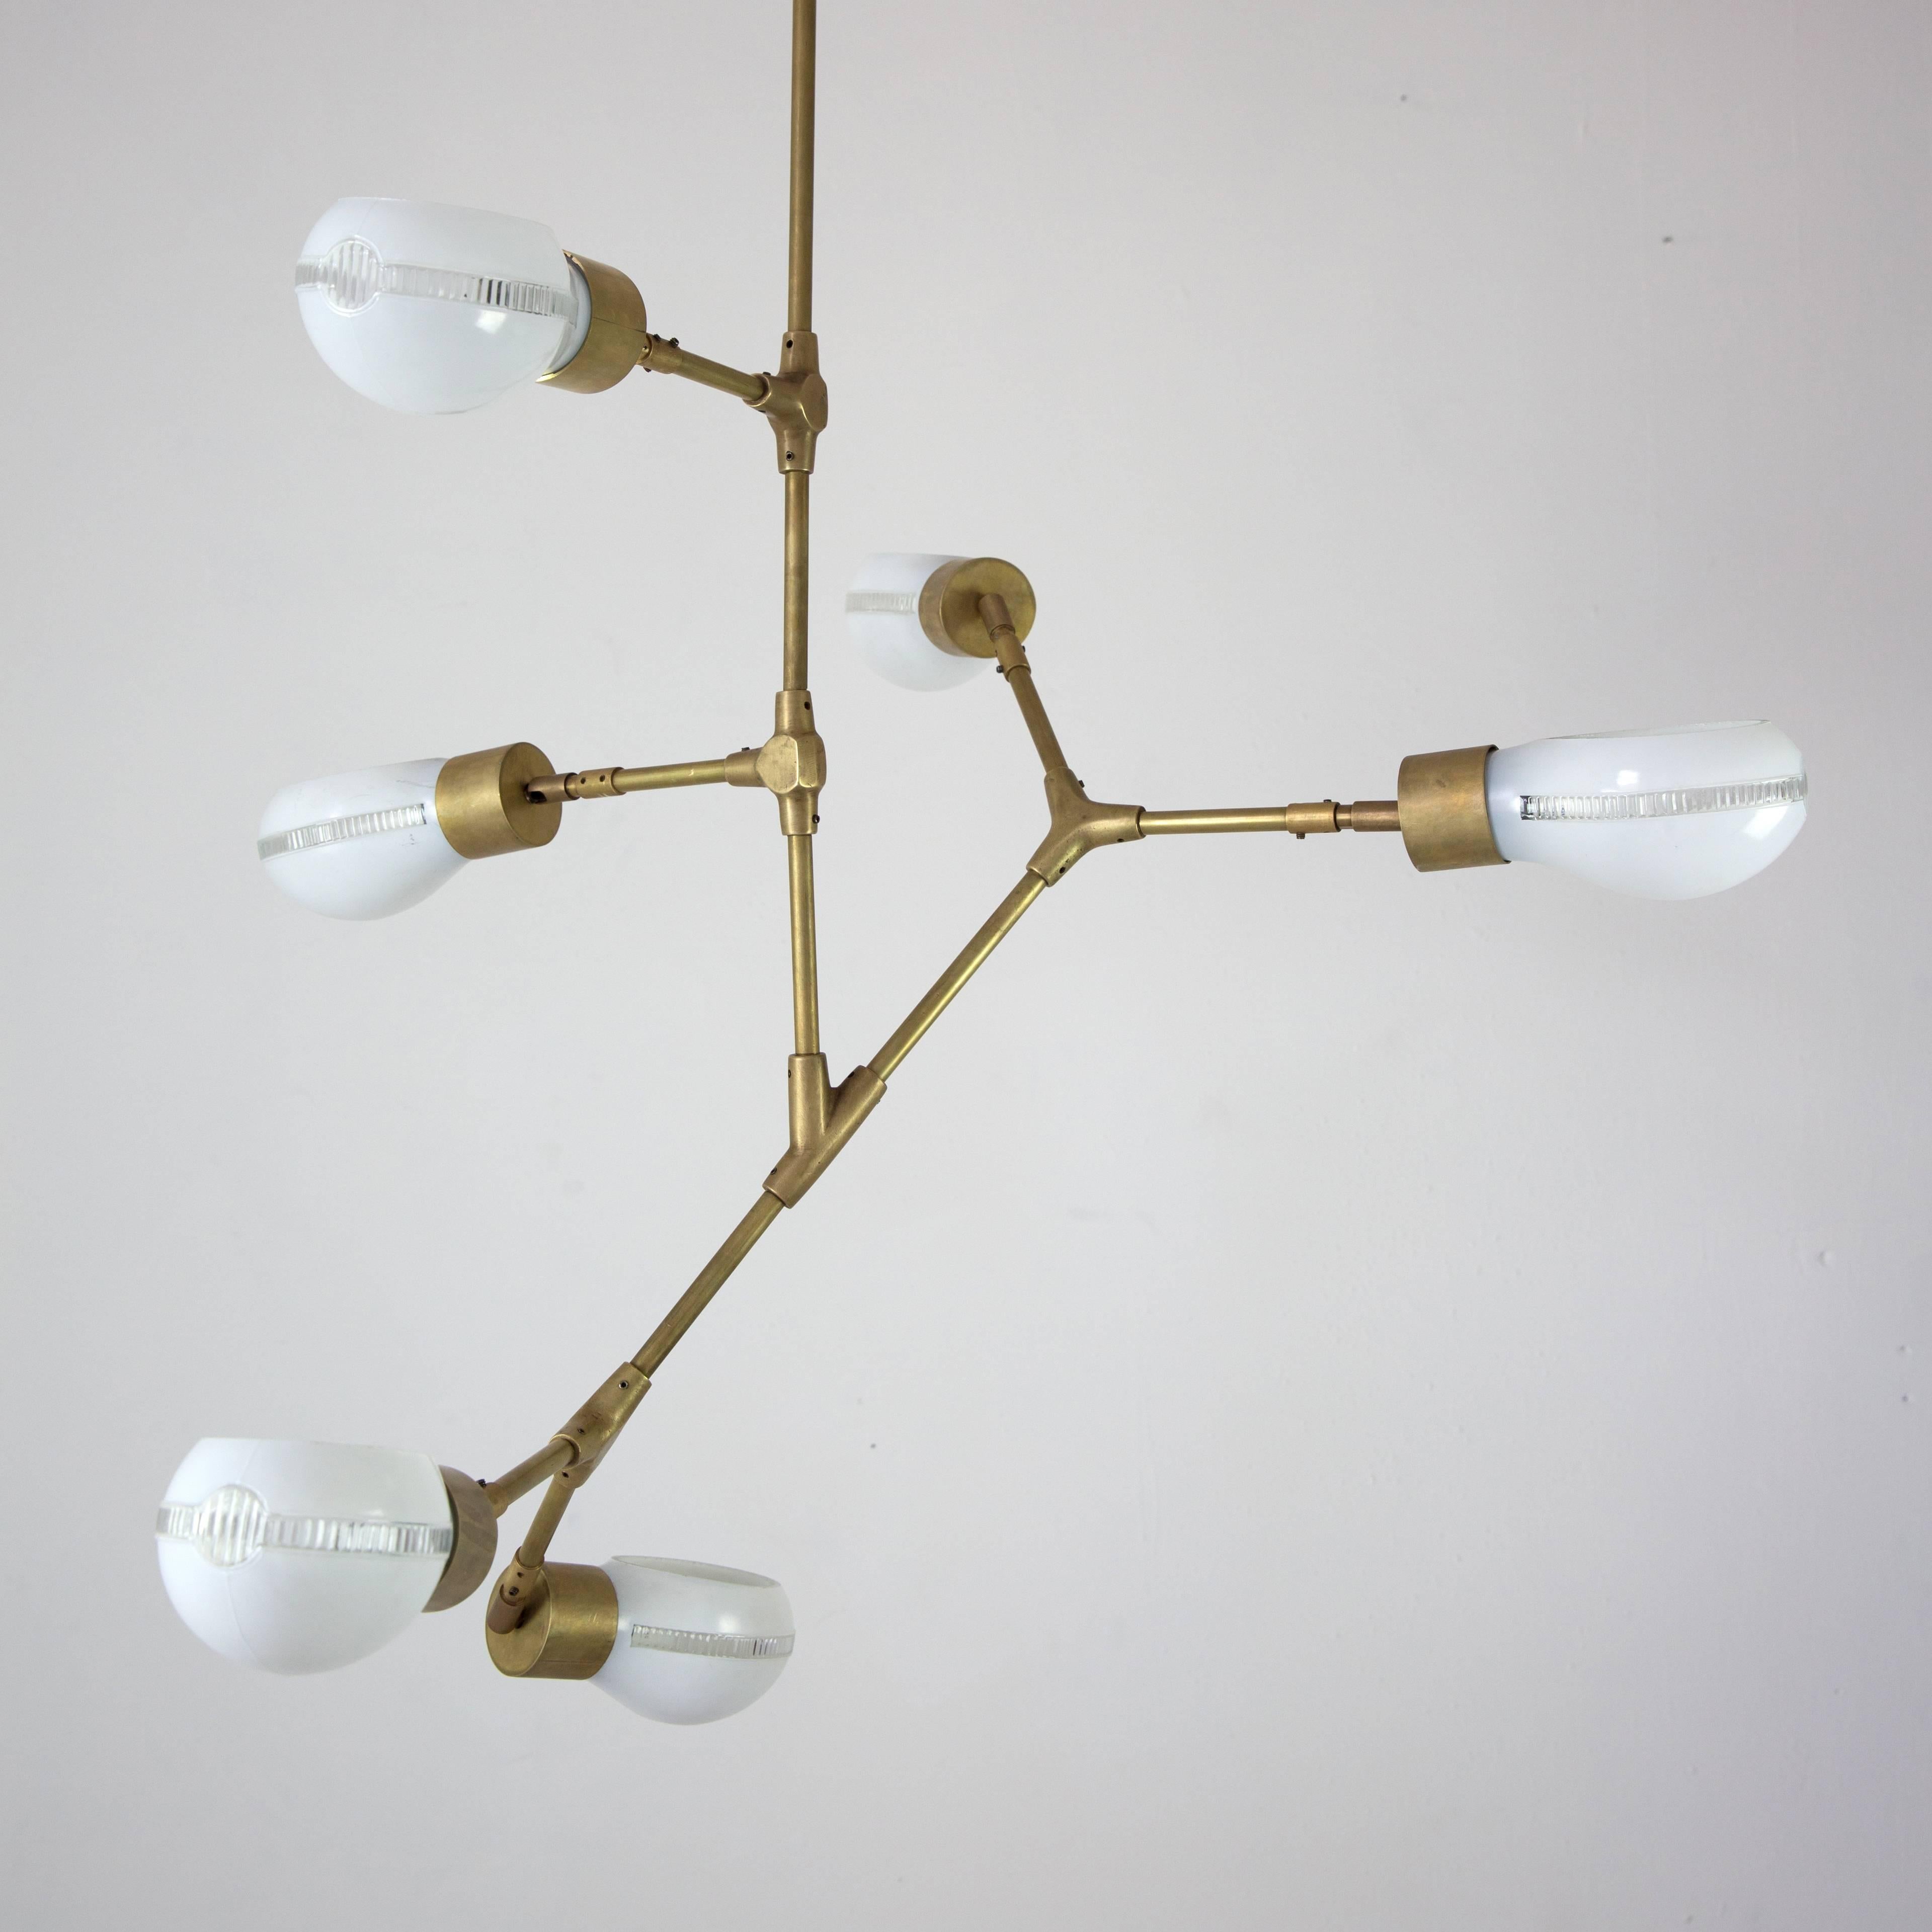 This contemporary pendant lamp design, offered in a limited edition of 12 pieces, is inspired by geometric and organic patterns as well as by industrial style with glass shades from the 1960s.

Designed with handcrafted bronze connections, this